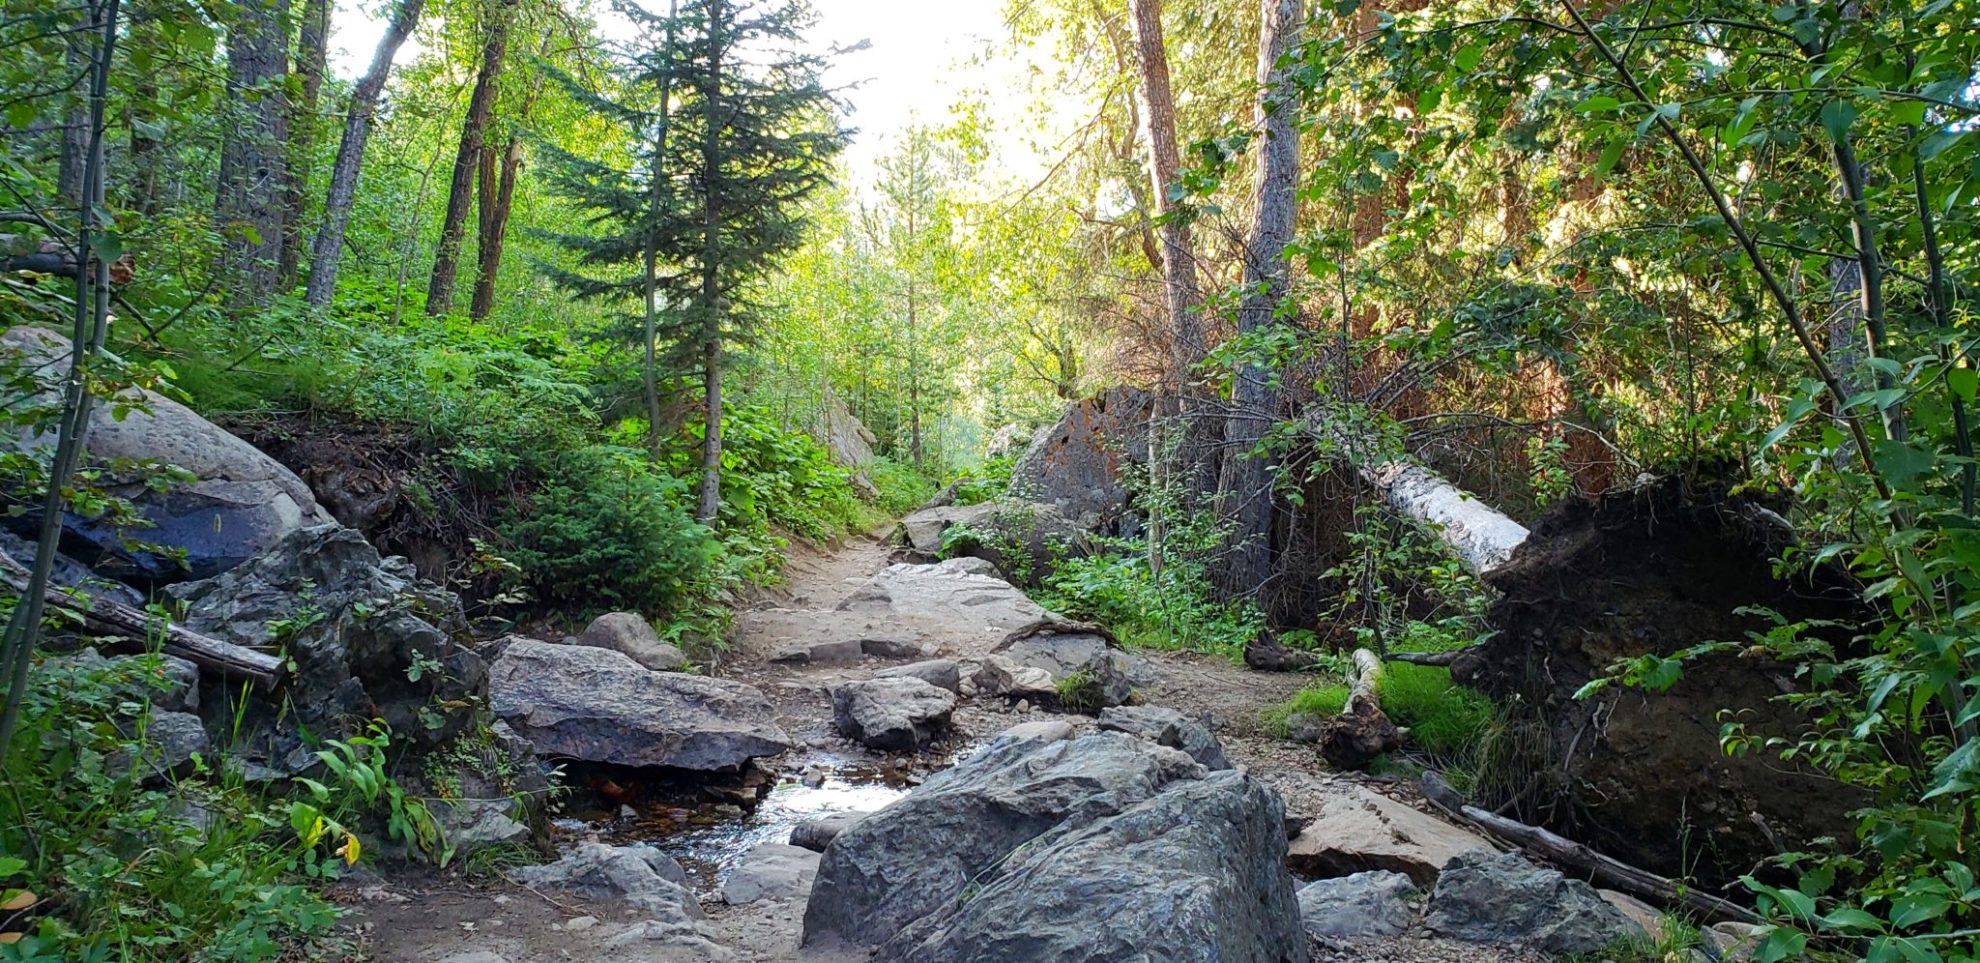 Trail cutting through pine, aspen, and spruce forest